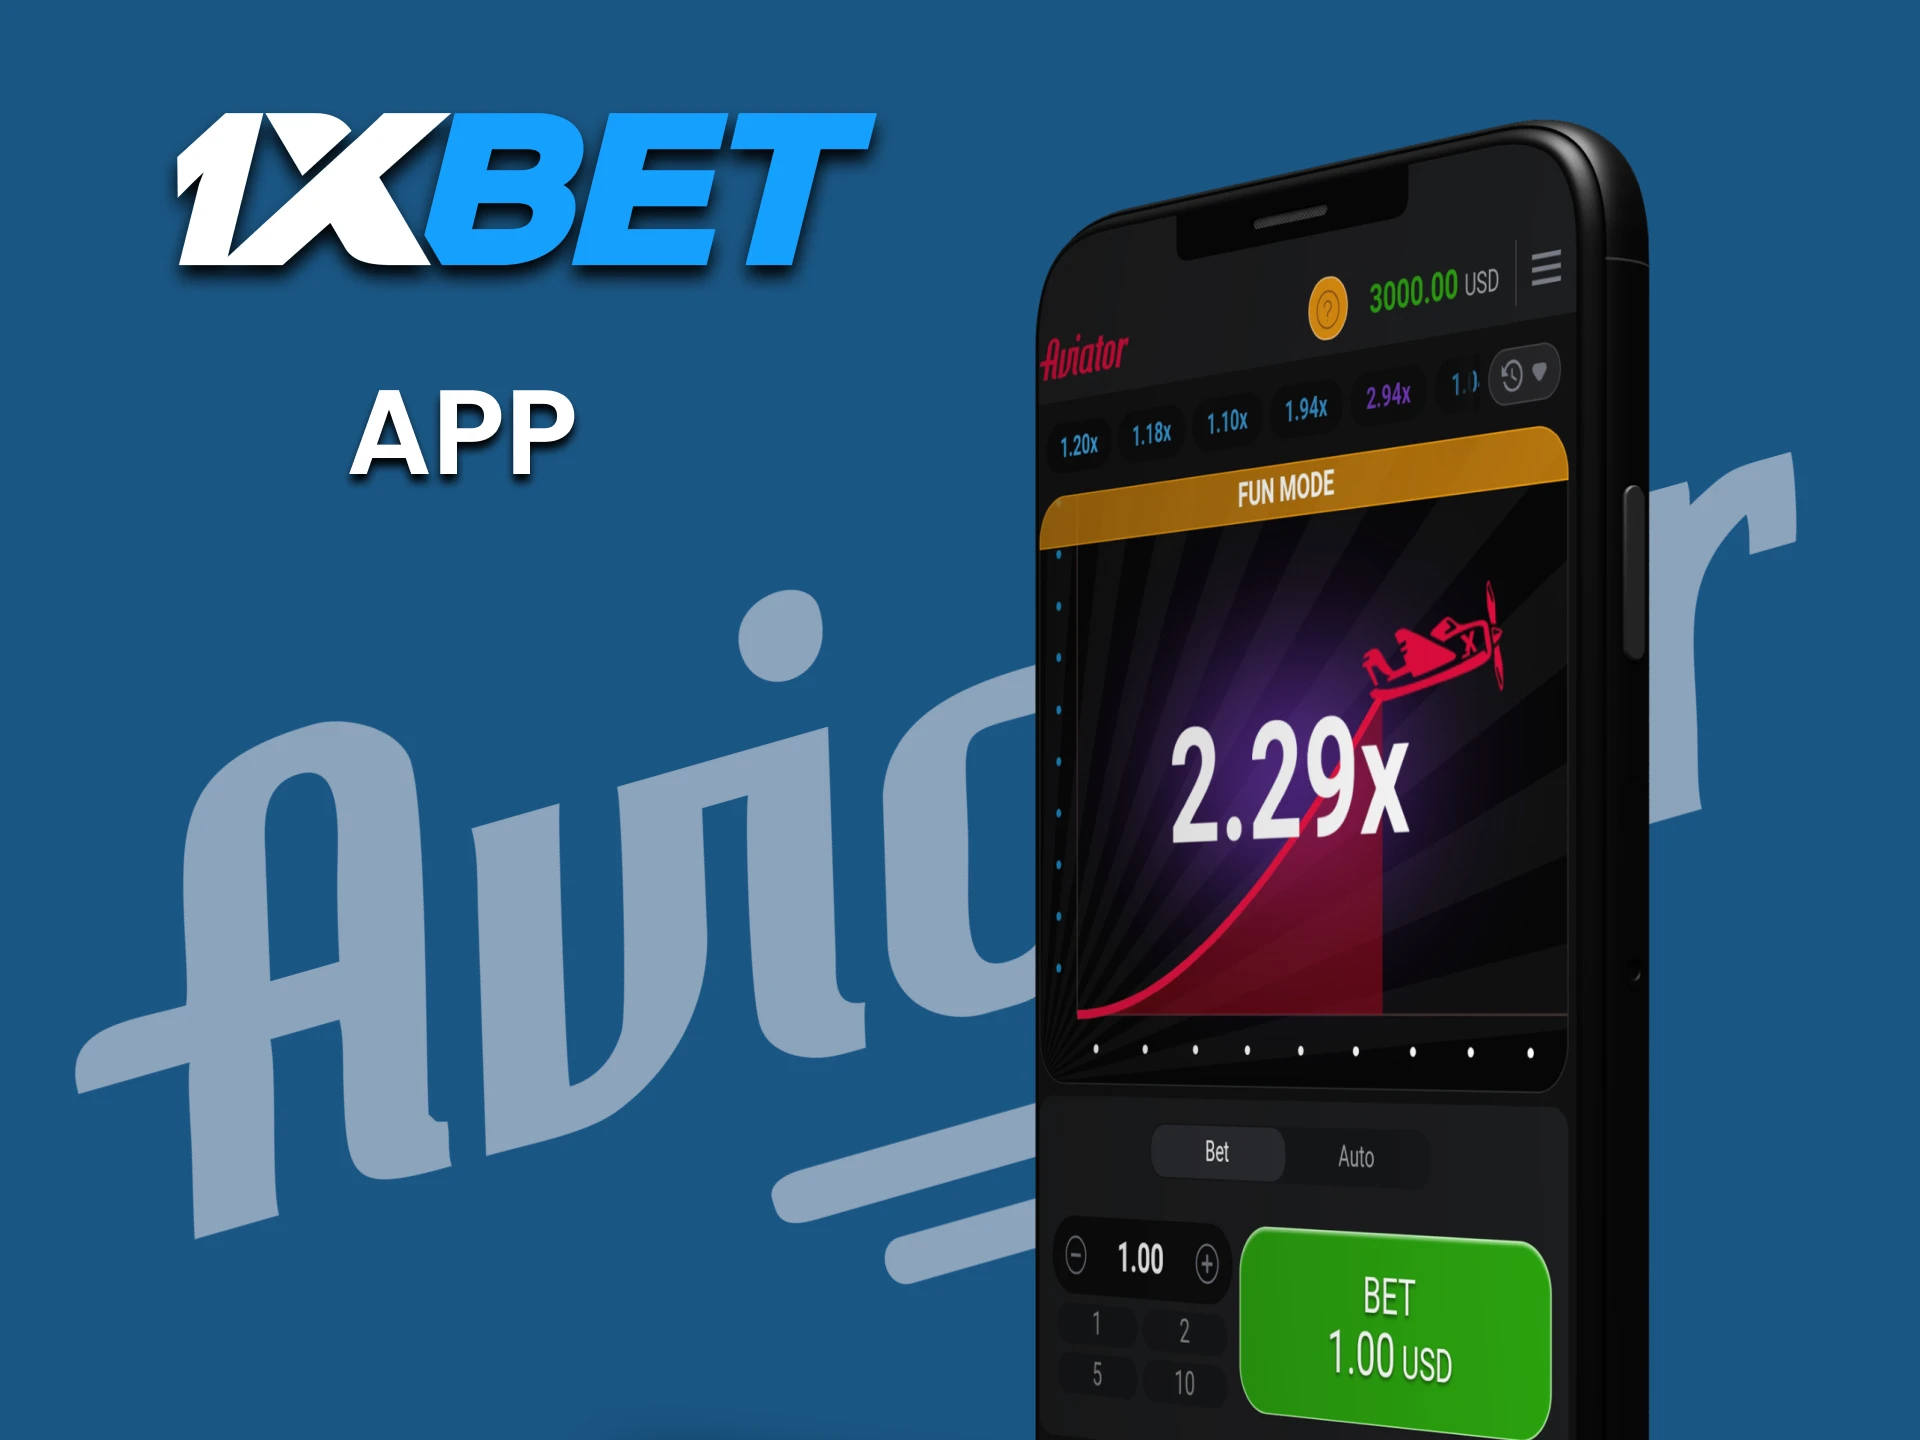 Download the 1xbet application on your phone to play Aviator.